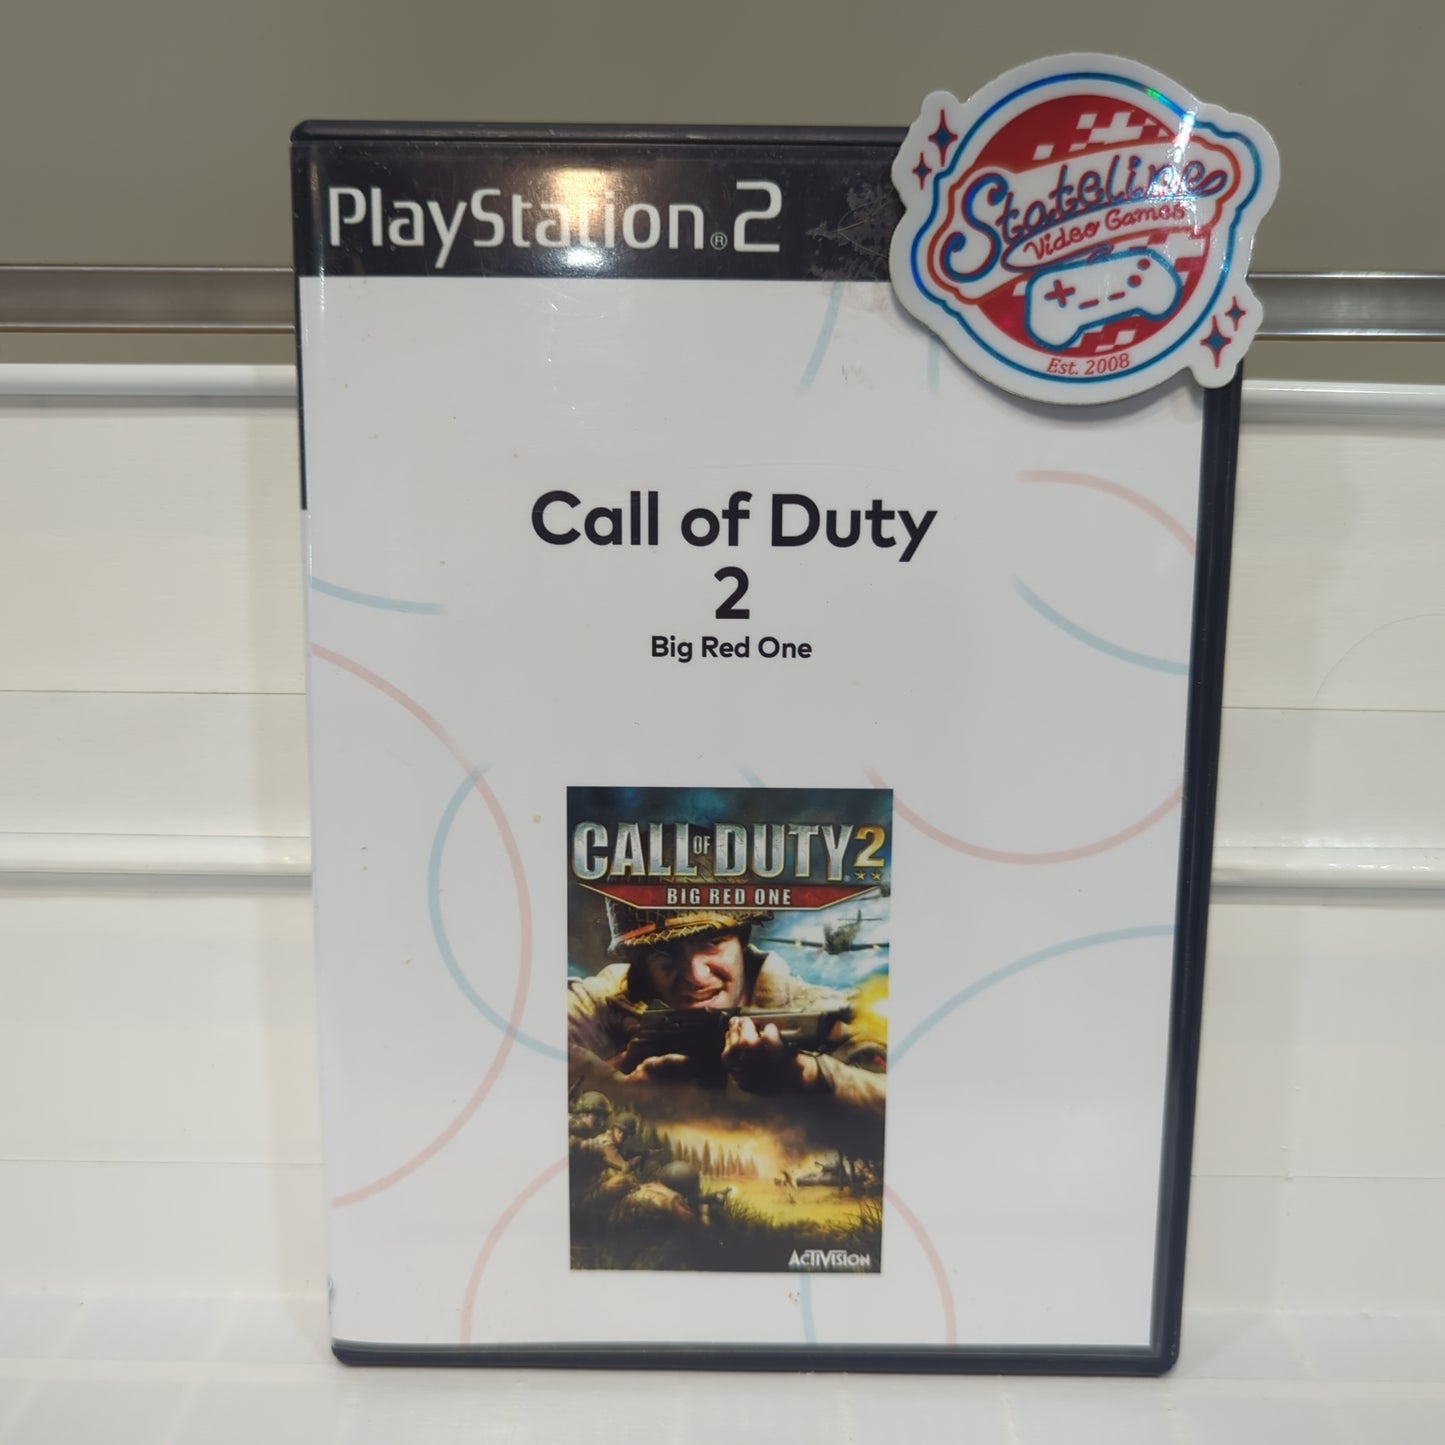 Call of Duty 2 Big Red One - Playstation 2